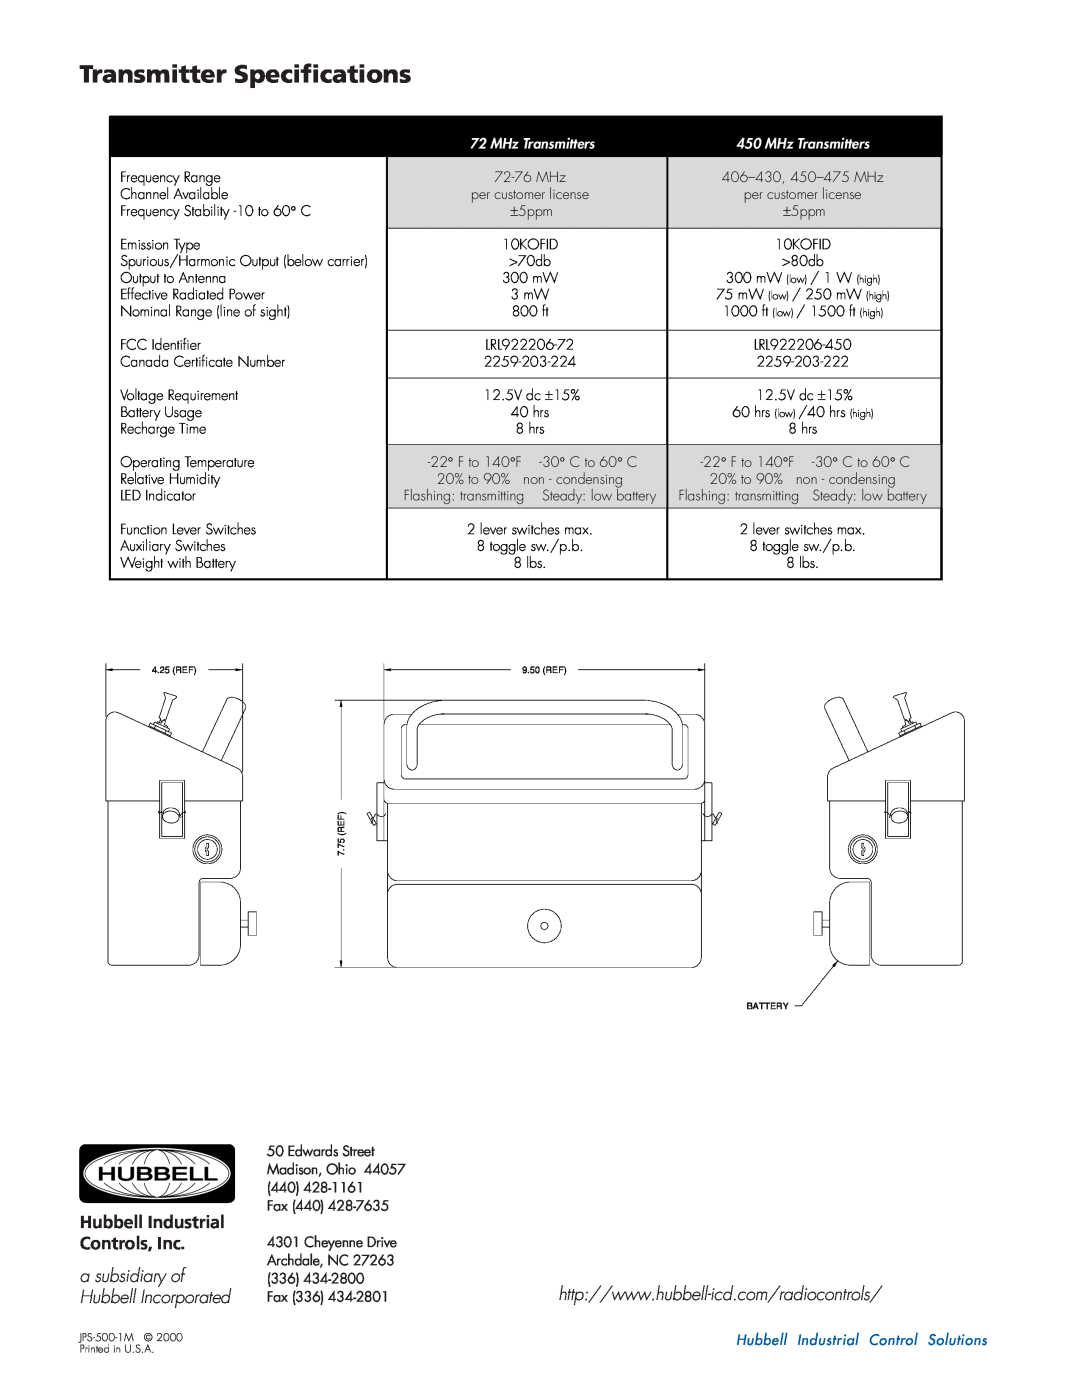 Hubbell 31.340 brochure Transmitter Specifications, HUBBELL Hubbell Industrial Controls, Inc, MHz Transmitters 